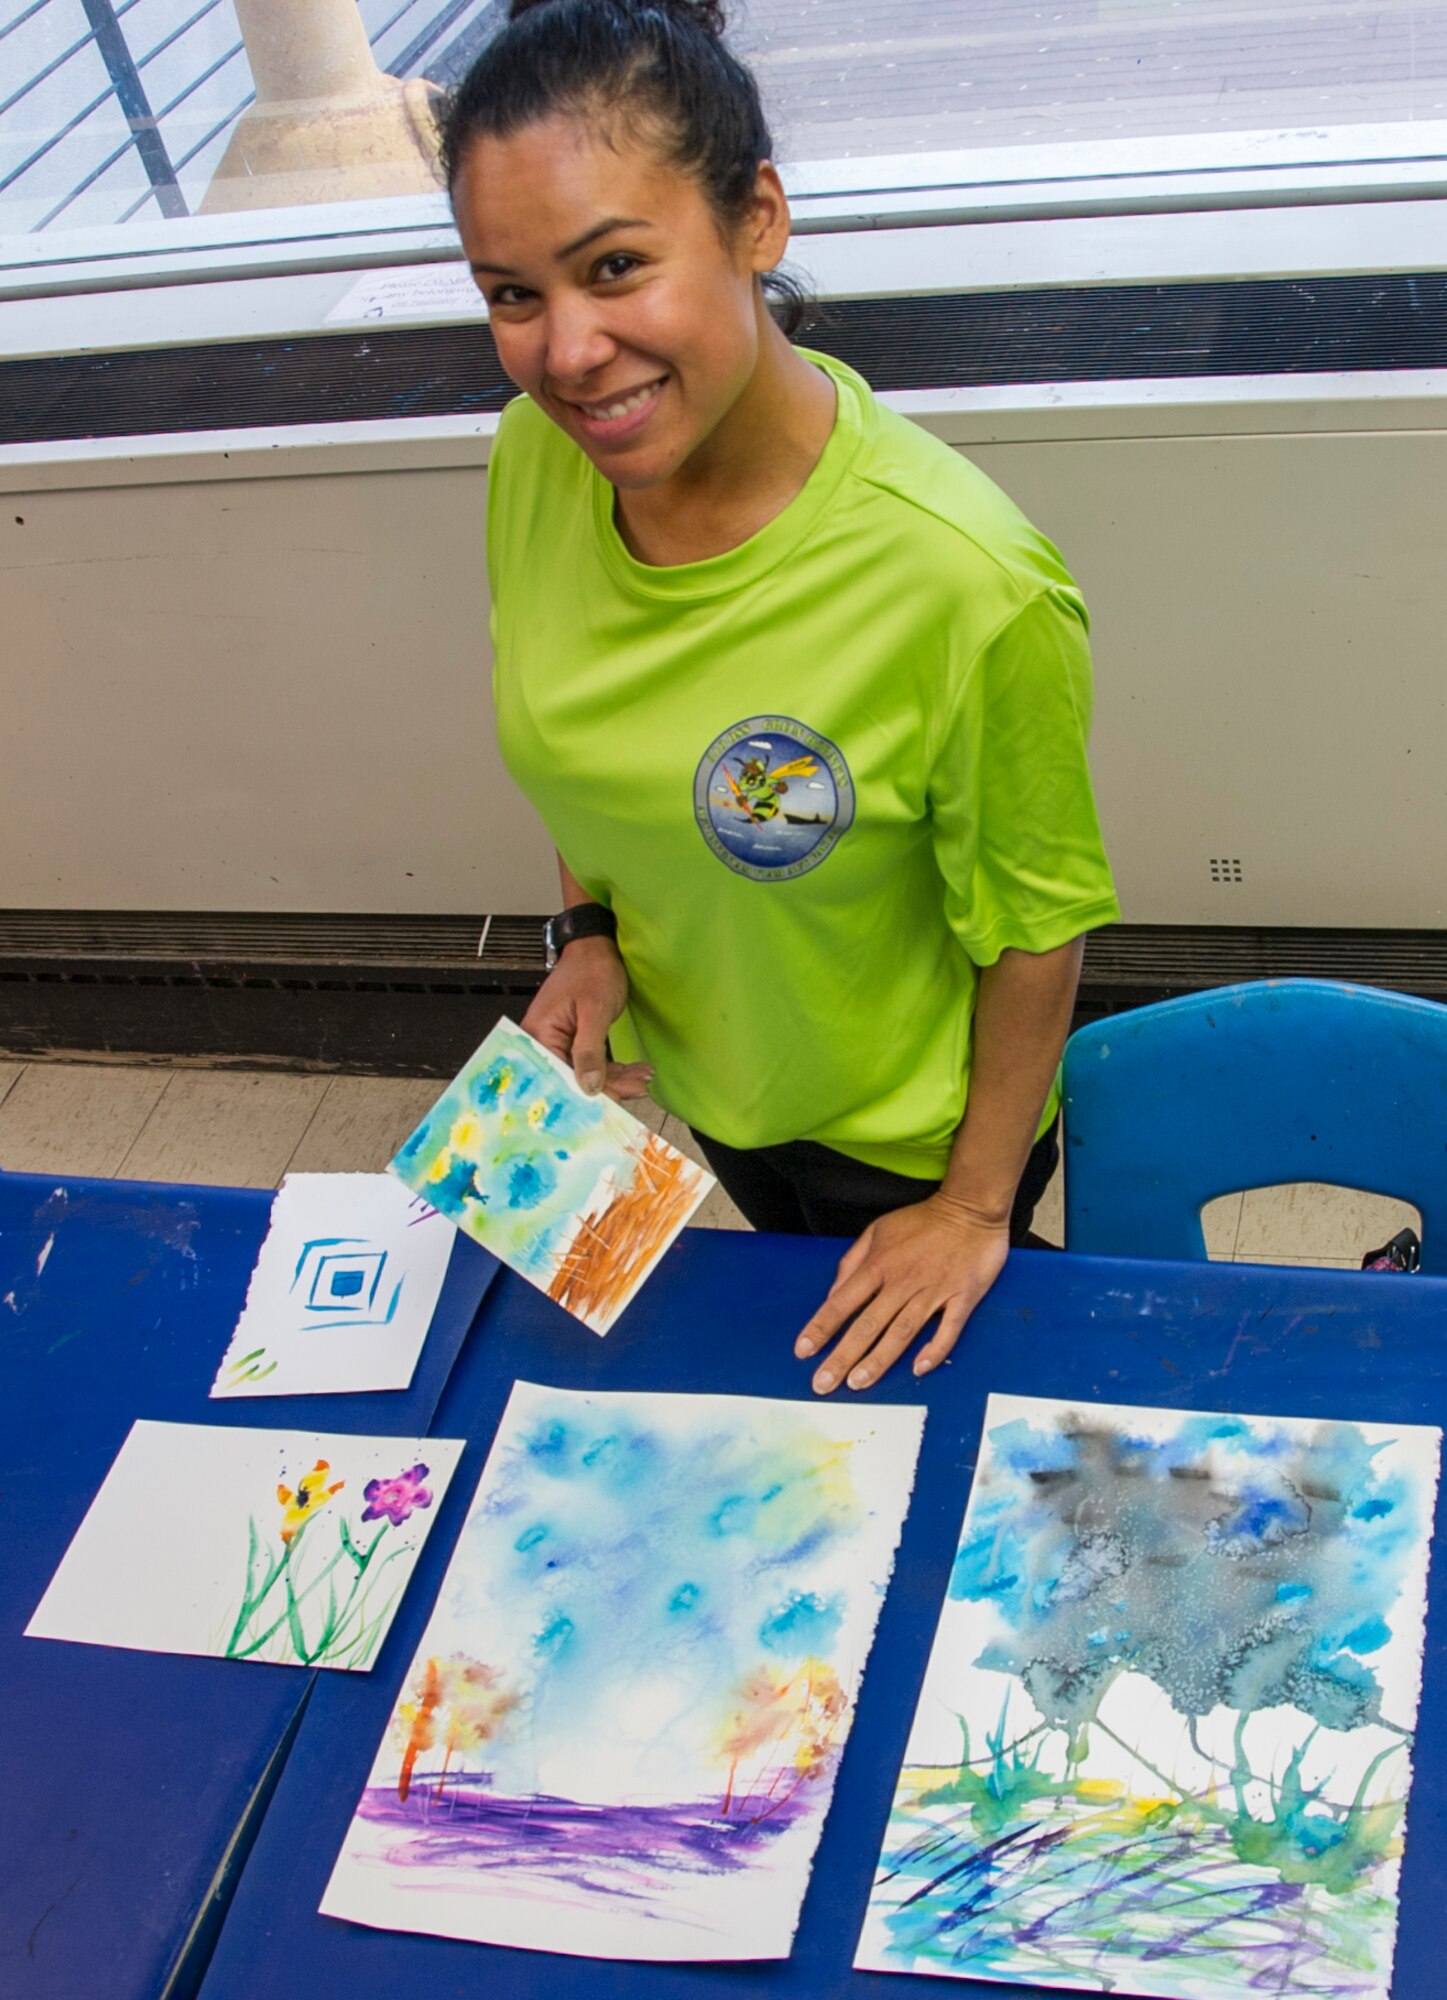 SCHRIEVER AIR FORCE BASE, Colo. -- Lt. Col. Morgenstarr Brienza, Air Force Space Command, poses with canvases she created during an art therapy class hosted by Kim le Nguyen at the Bemis School of Art in Colorado Springs on Friday, Apr. 21st, 2017. Nguyen teaches a Military Artistic Healing program at the Colorado Springs Fine Arts Center, using all forms of art to encourage healing among military members and their families.  (U.S. Air Force photo/Senior Airman Laura Turner)